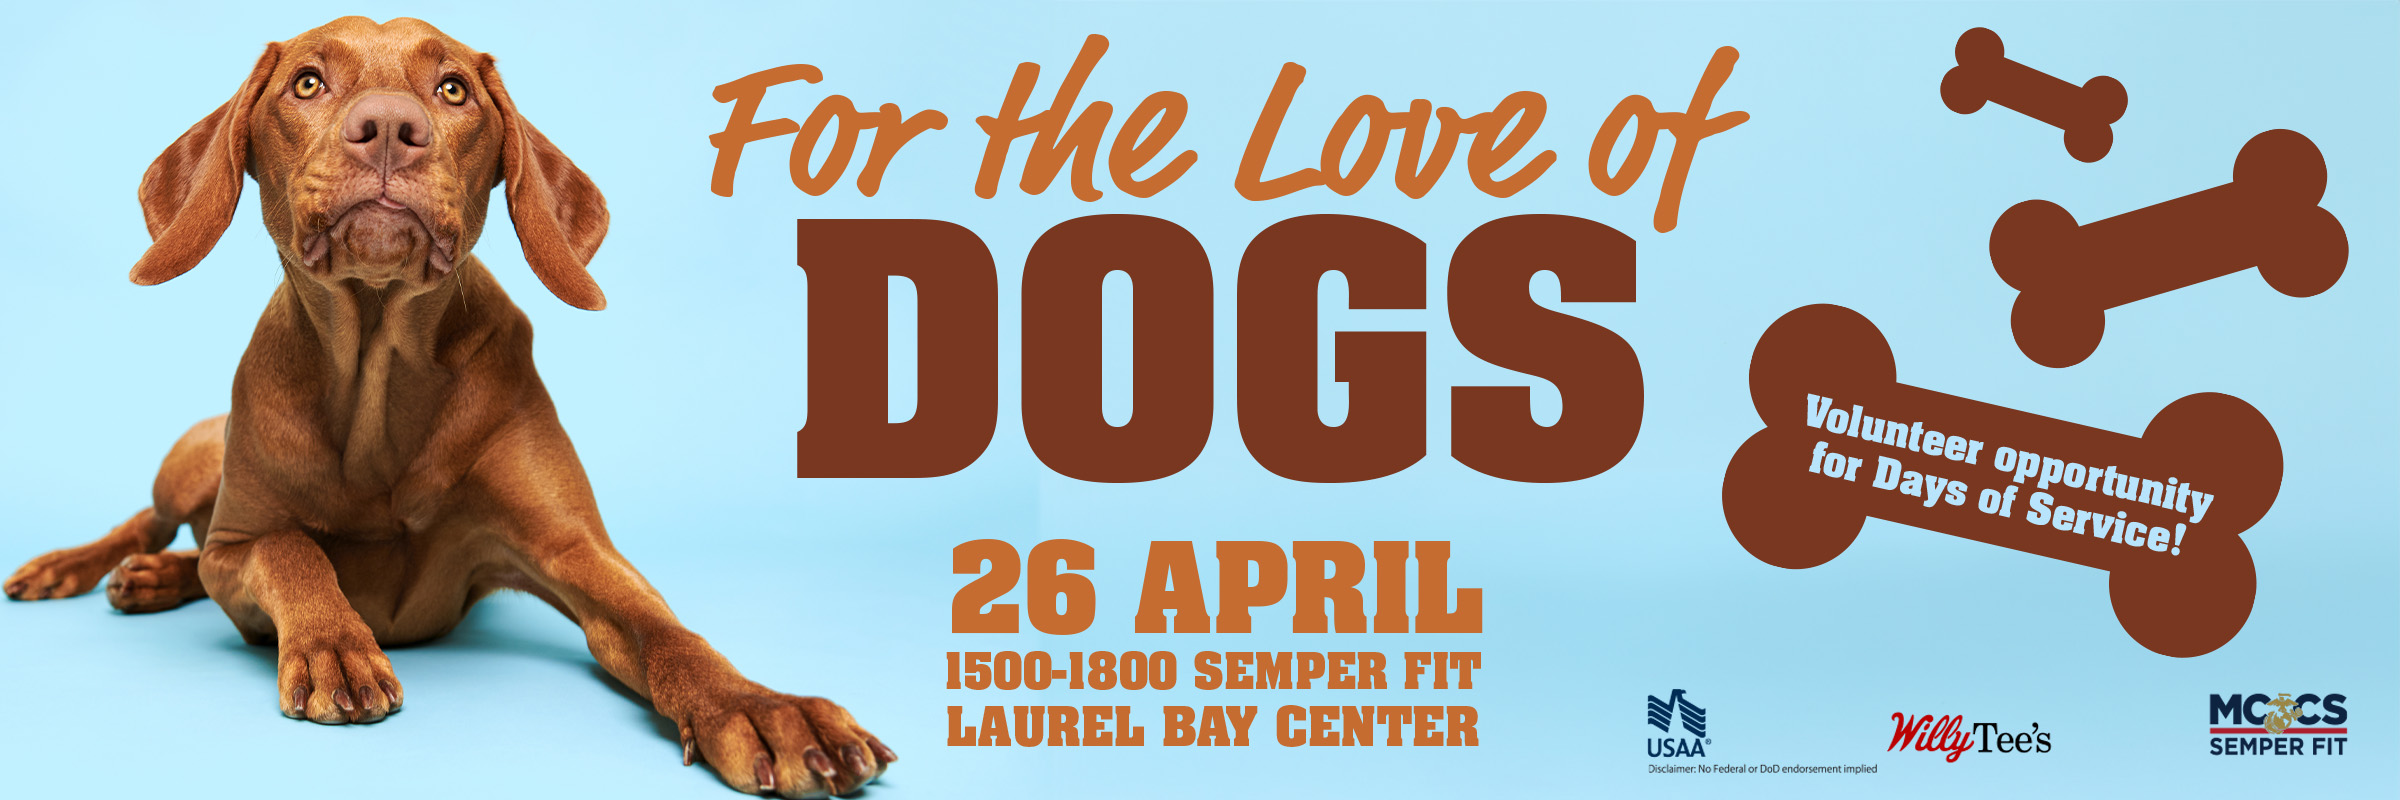 04-26 For the Love of Dogs_WEB.jpg